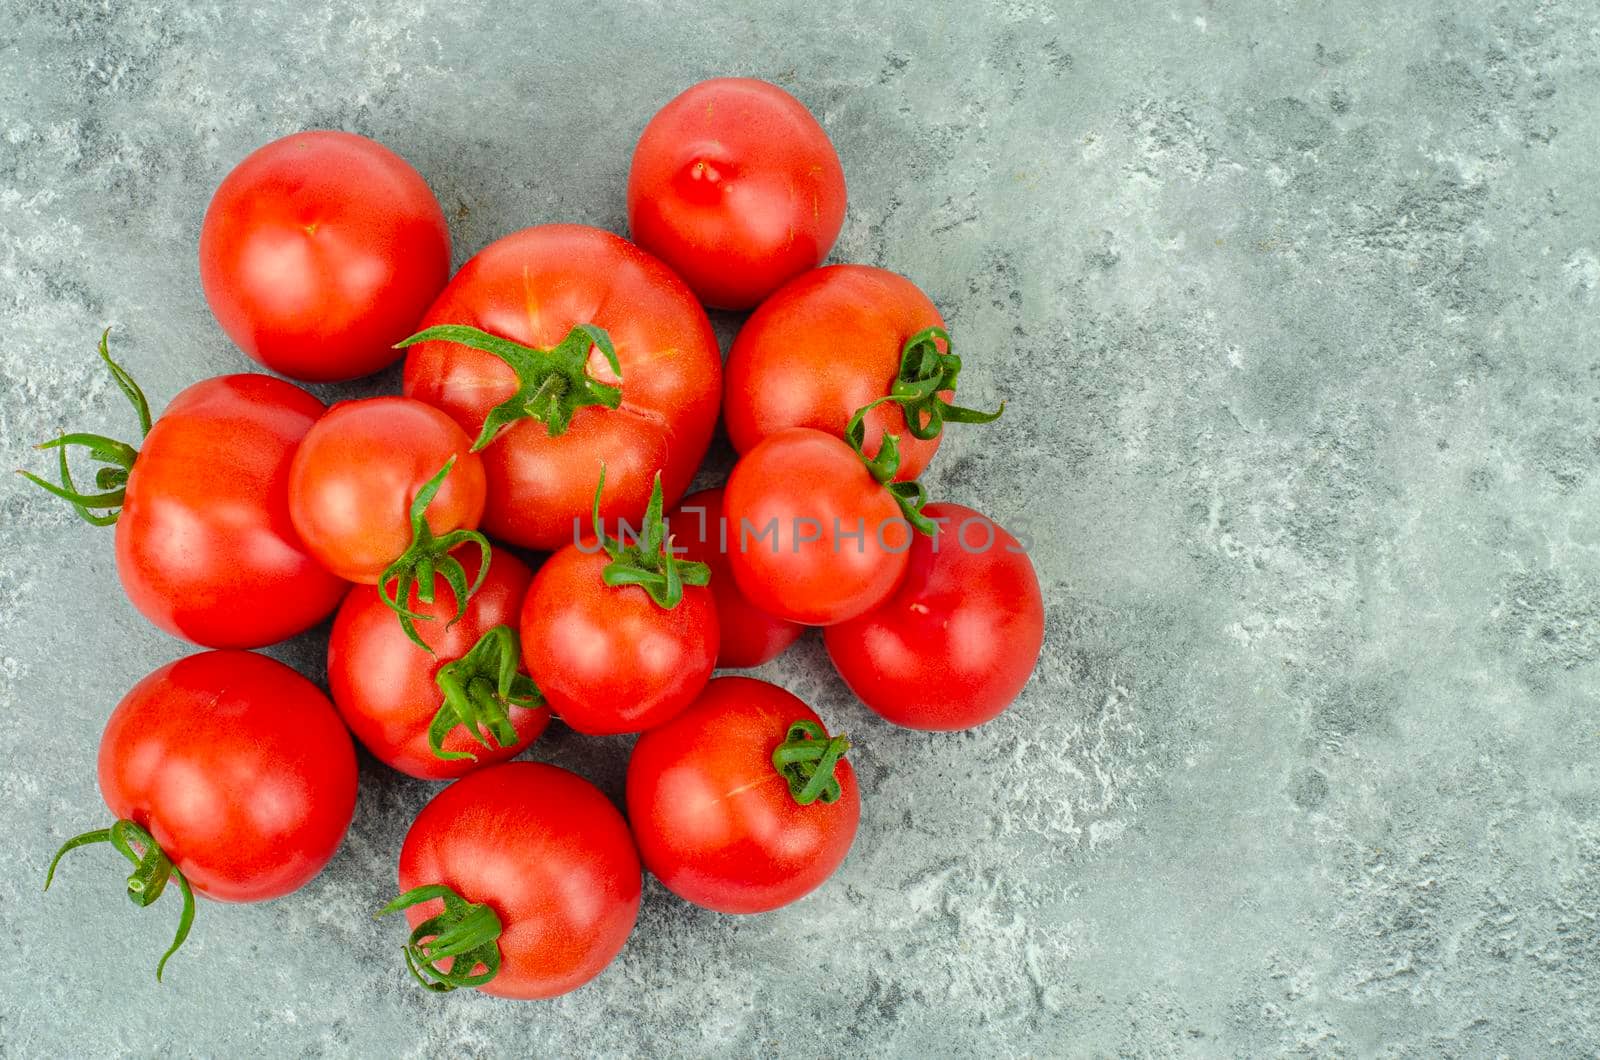 Bunch of ripe tomatoes on blue-gray background. Studio Photo.